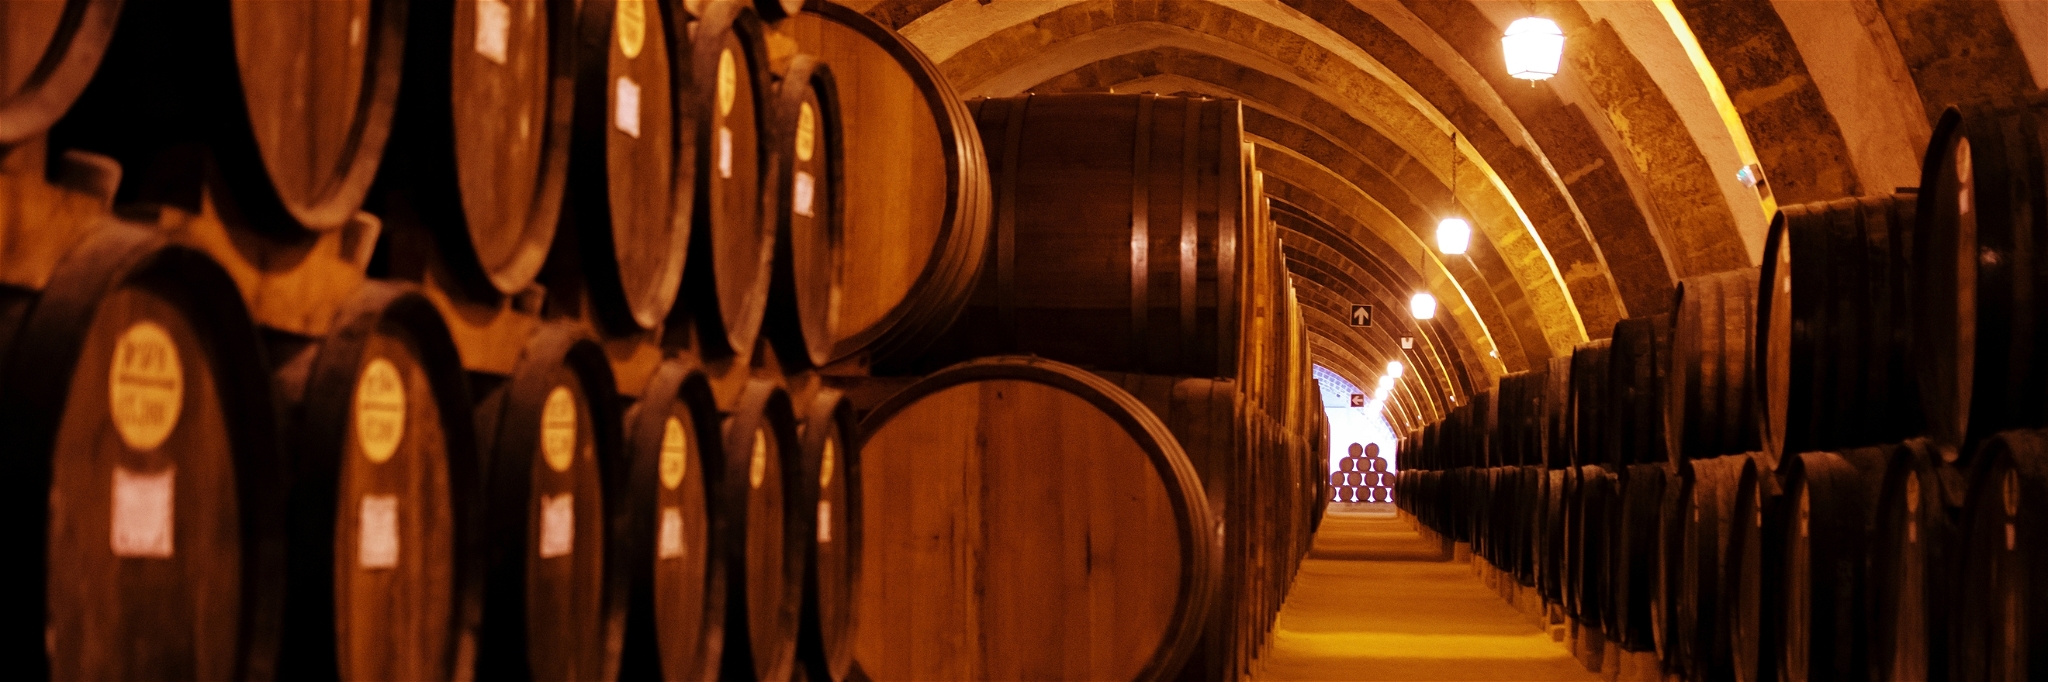 Sherry Regulations are Undergoing Major Changes